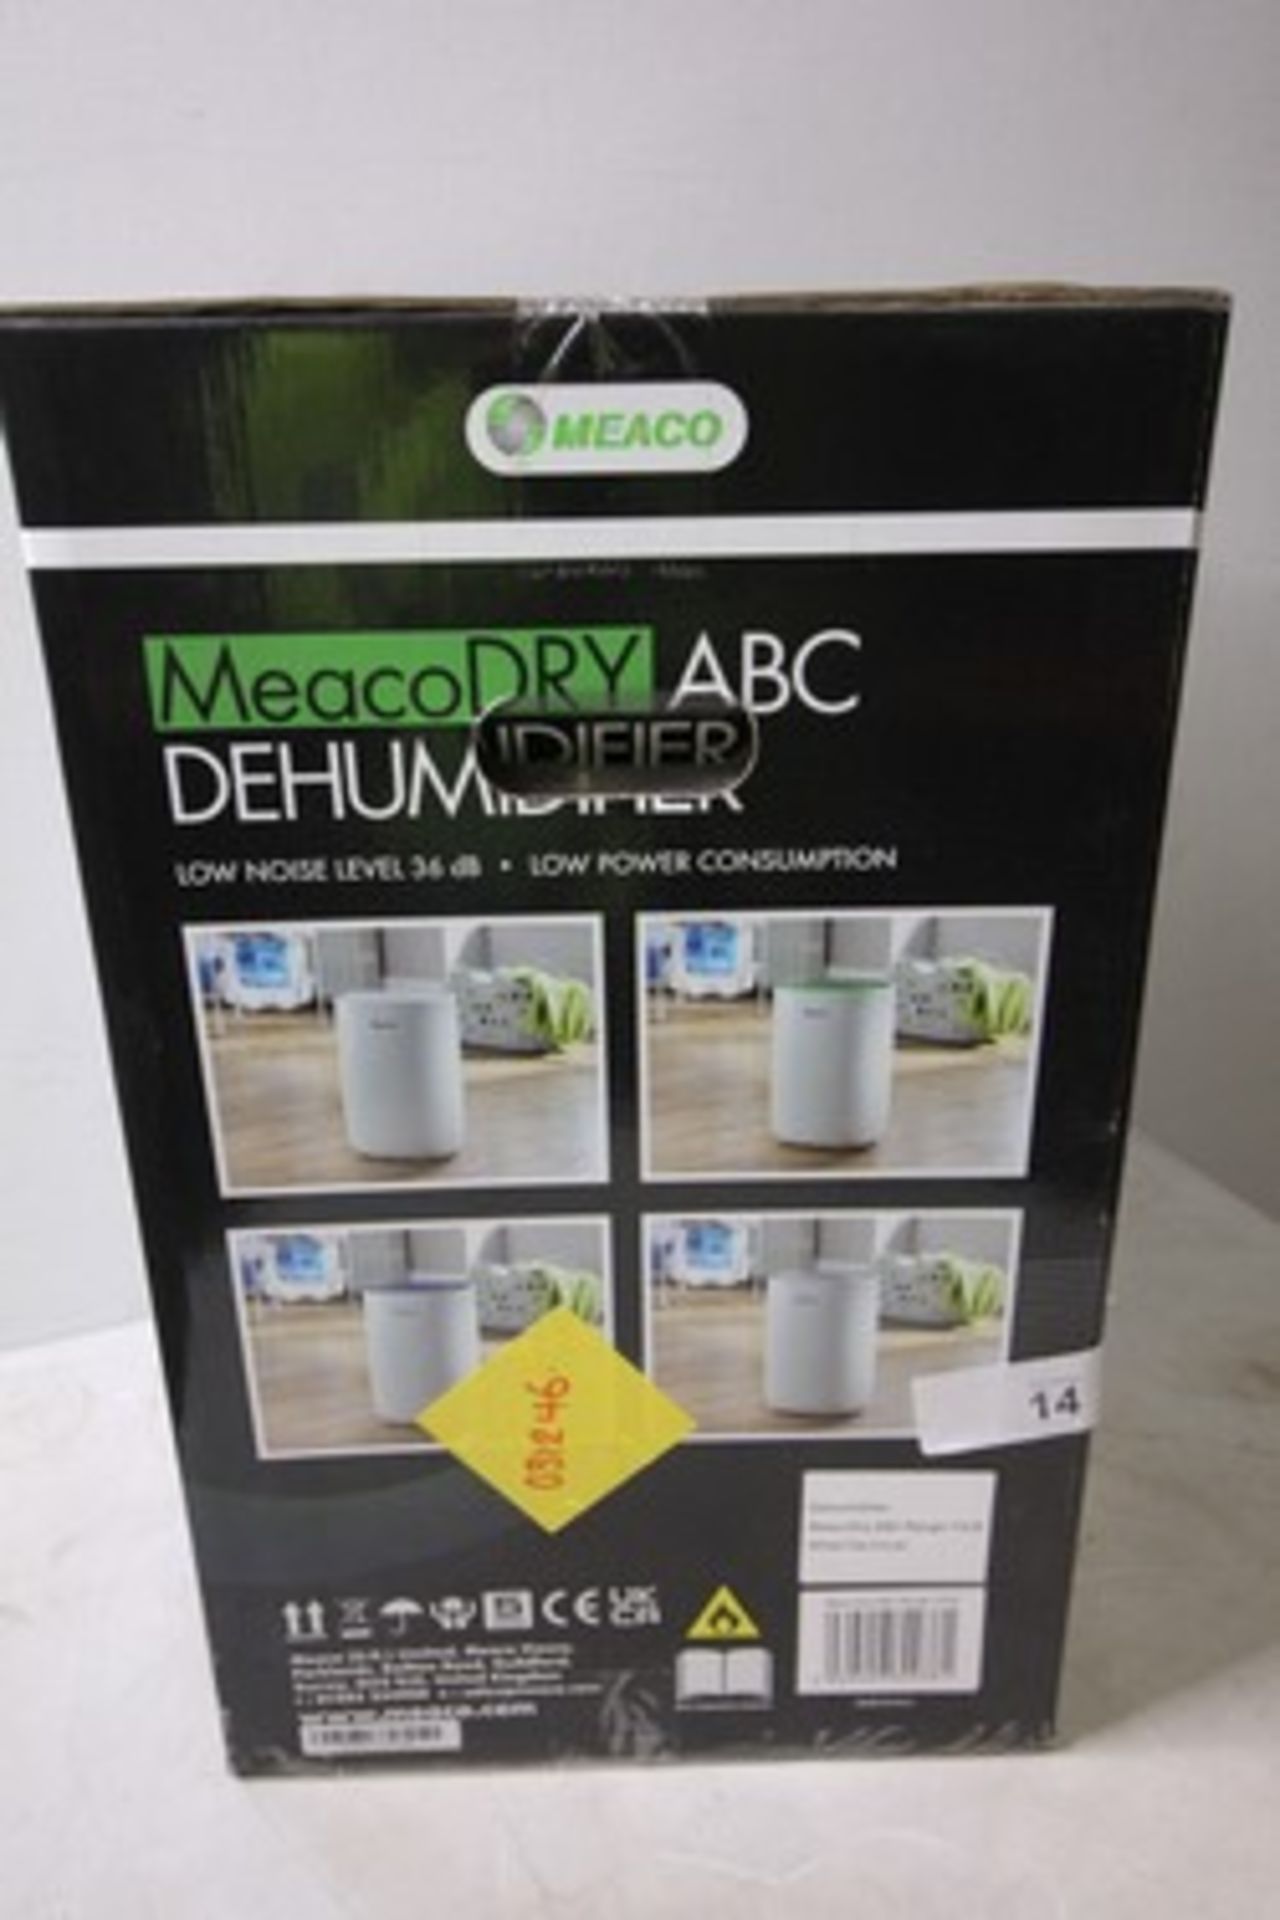 1 x Meaco ABC 10 litre dehumidifier, model MPR221072573225, low noise level 36db - Sealed new in box - Image 2 of 2